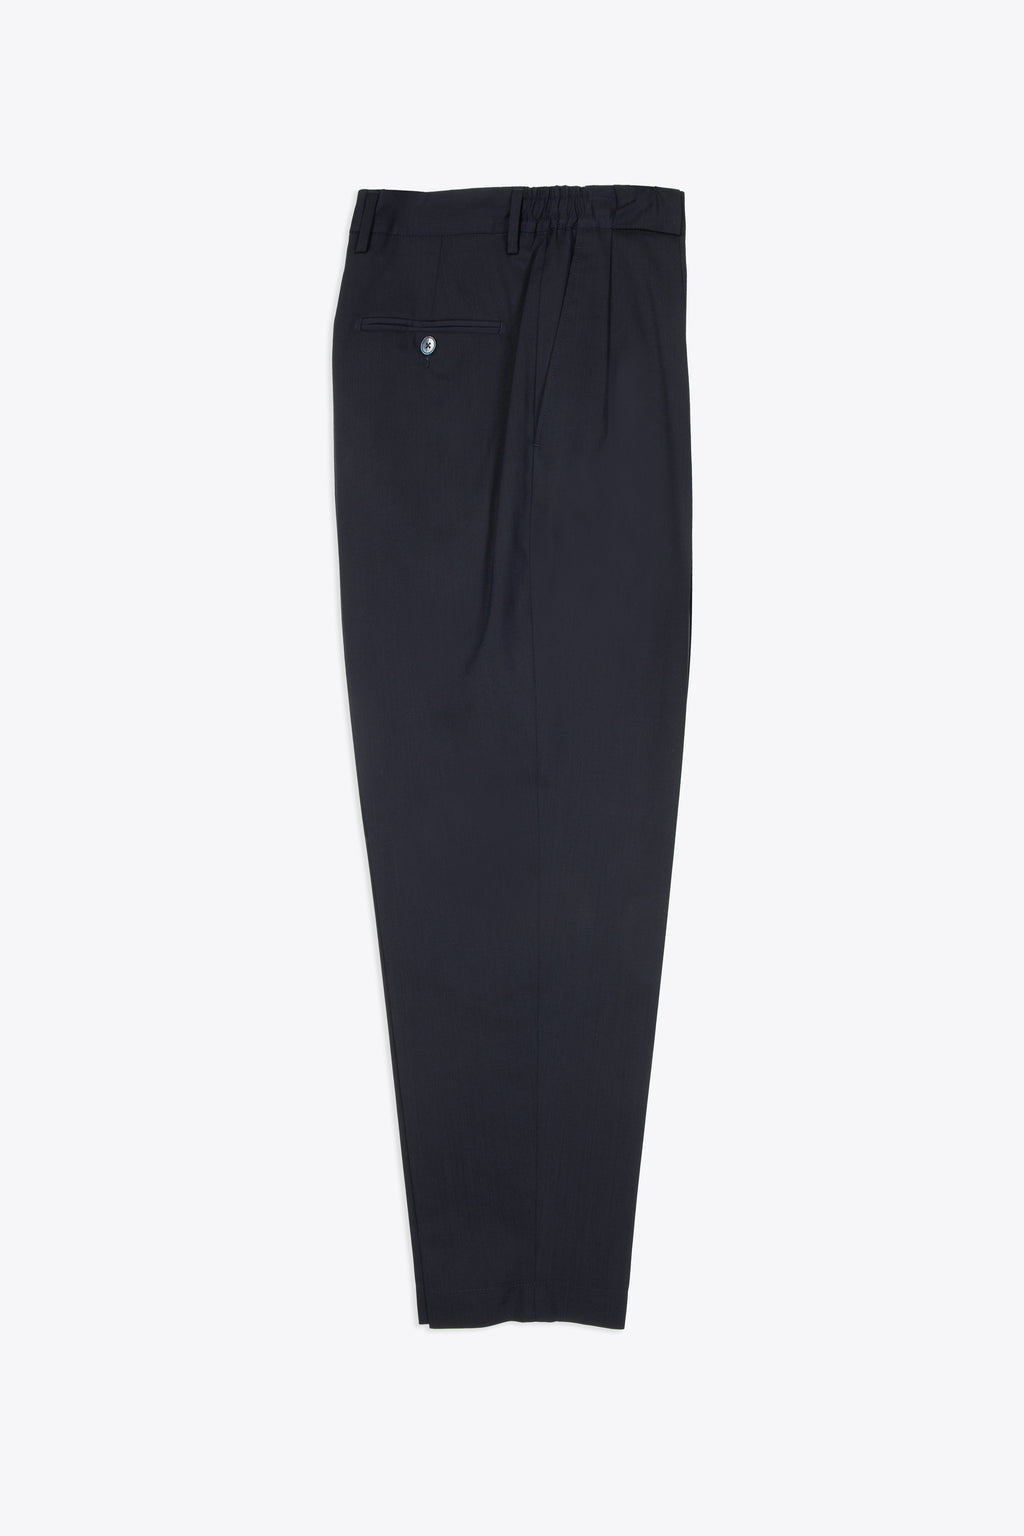 alt-image__Blue-tailored-wool-pleated-cropped-pant---Portobellos